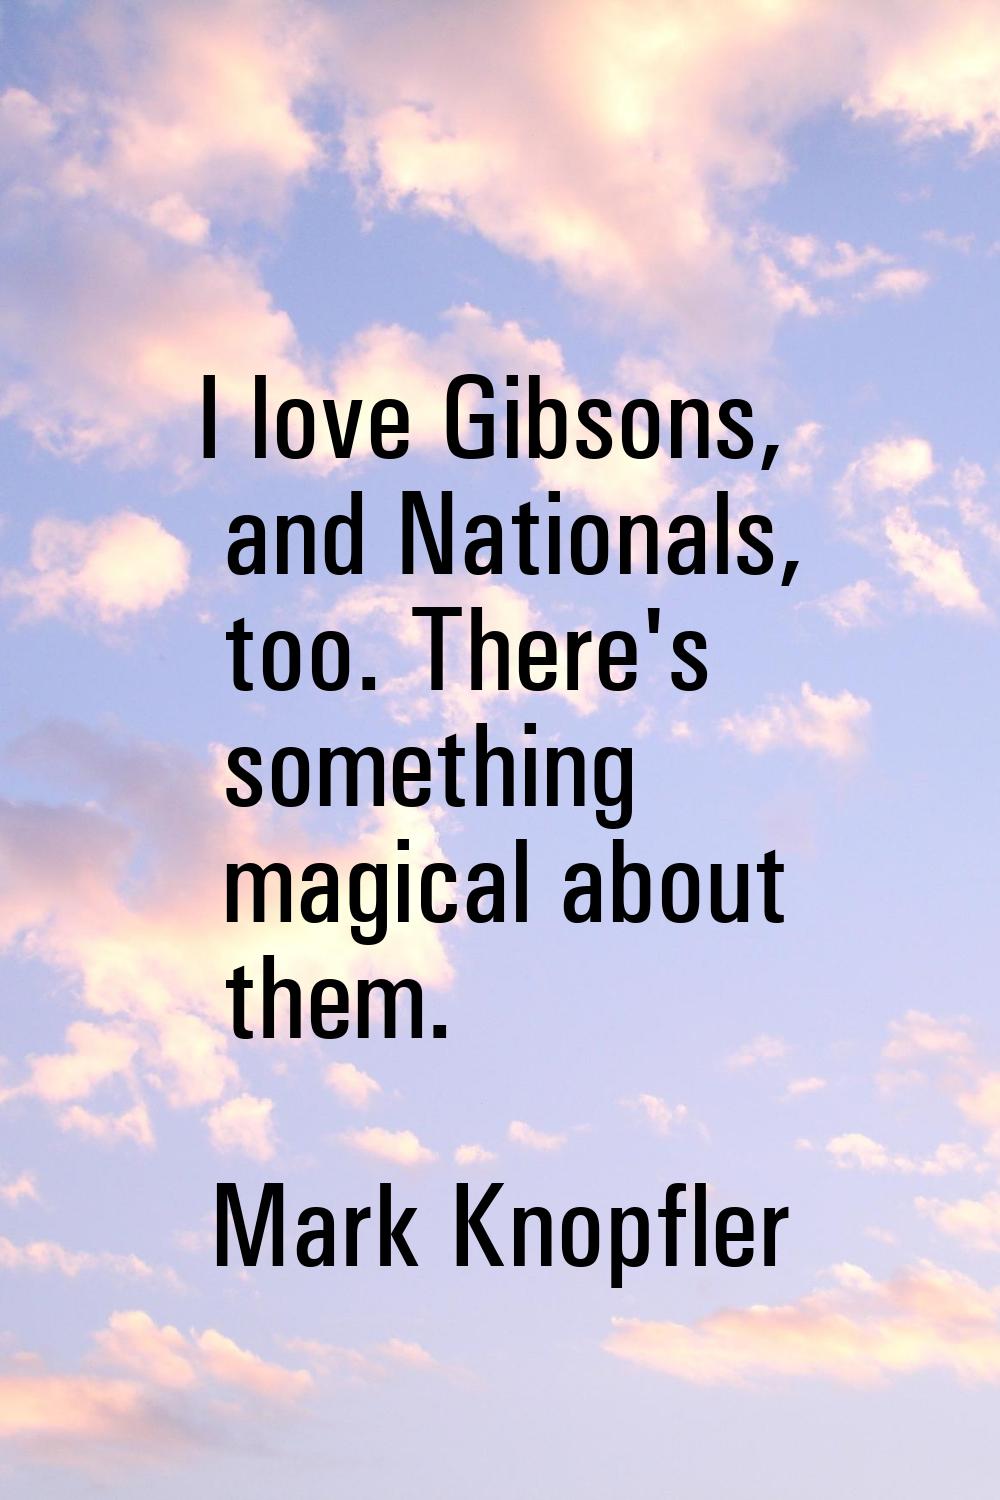 I love Gibsons, and Nationals, too. There's something magical about them.